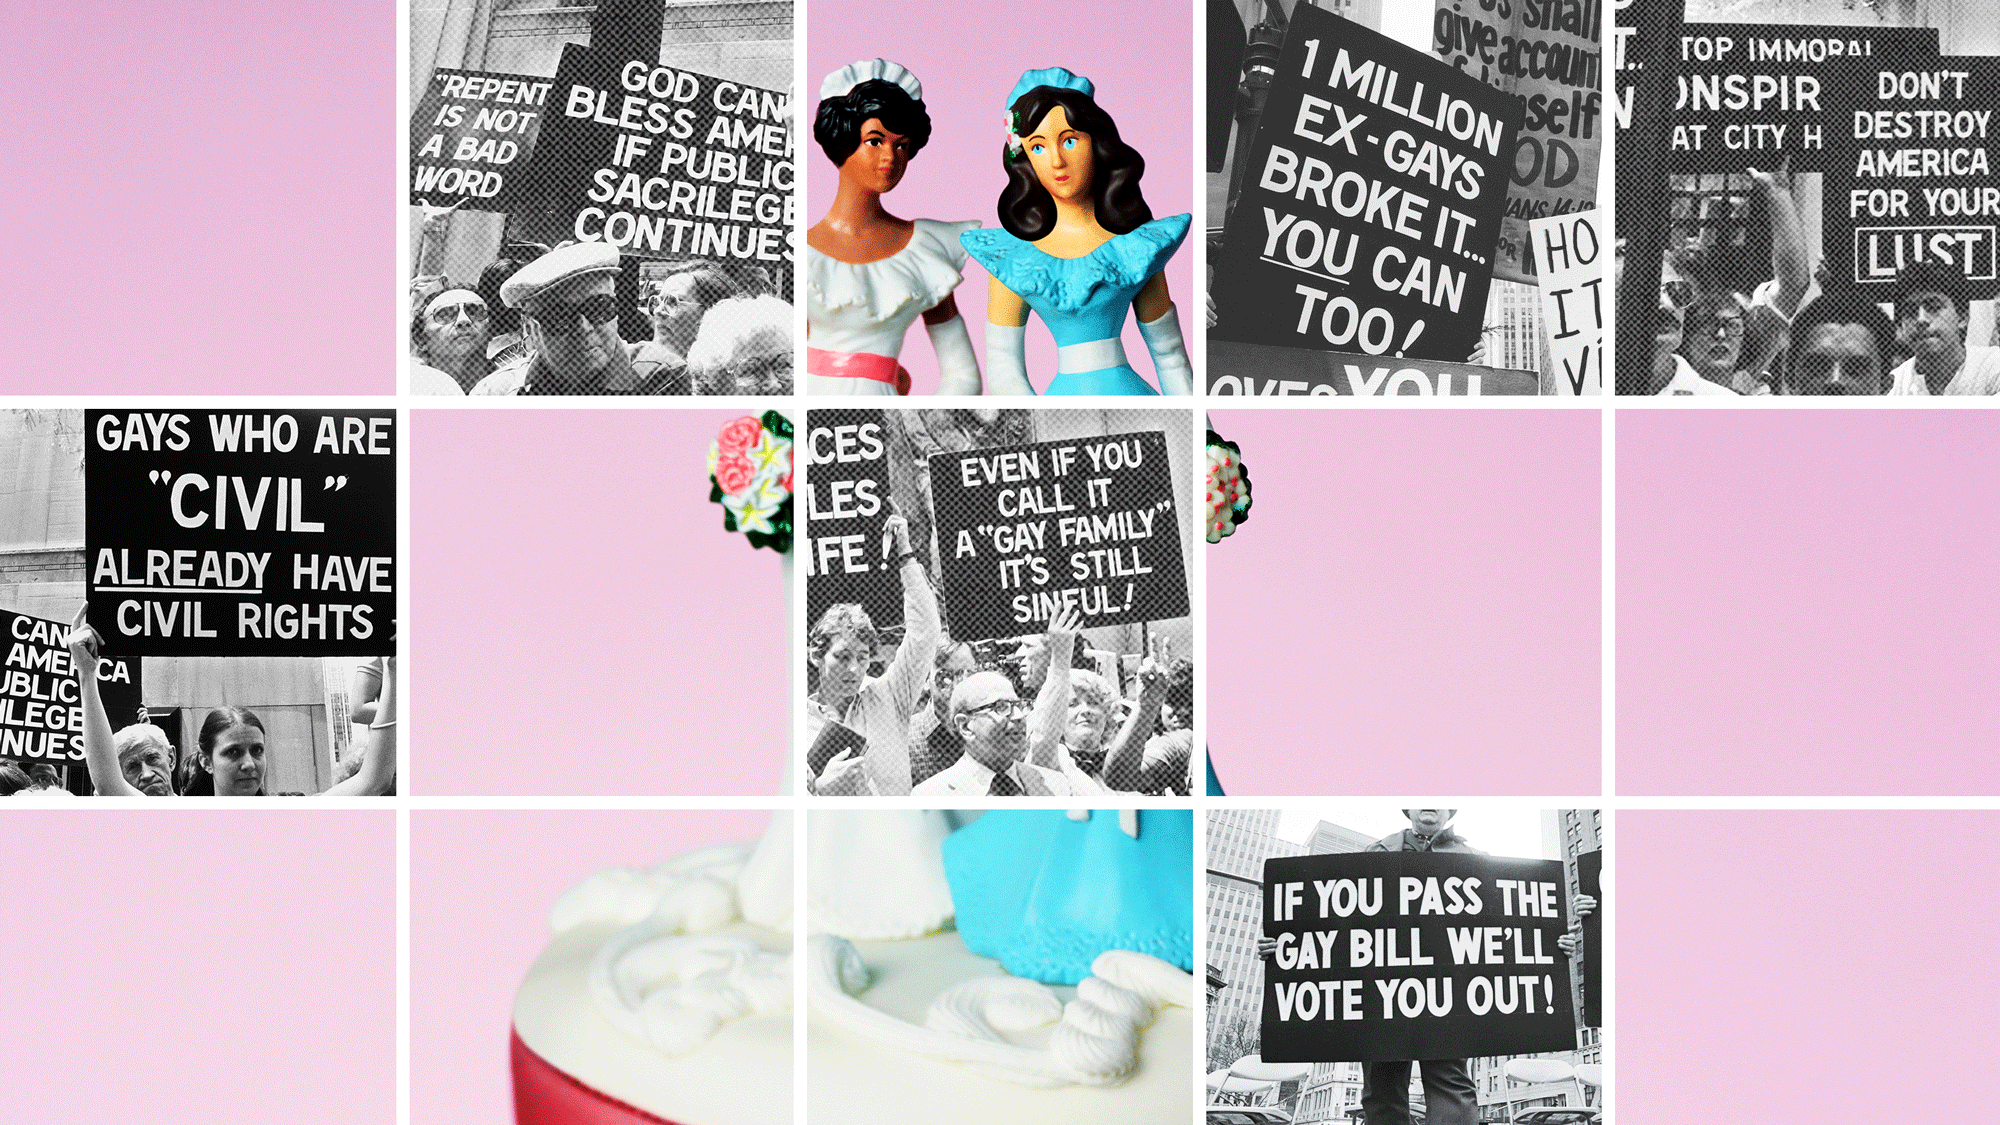 An artistic collage of a wedding cake with two brides as the figurines, mixed with a collage of an LGTBQ+ rights protest.